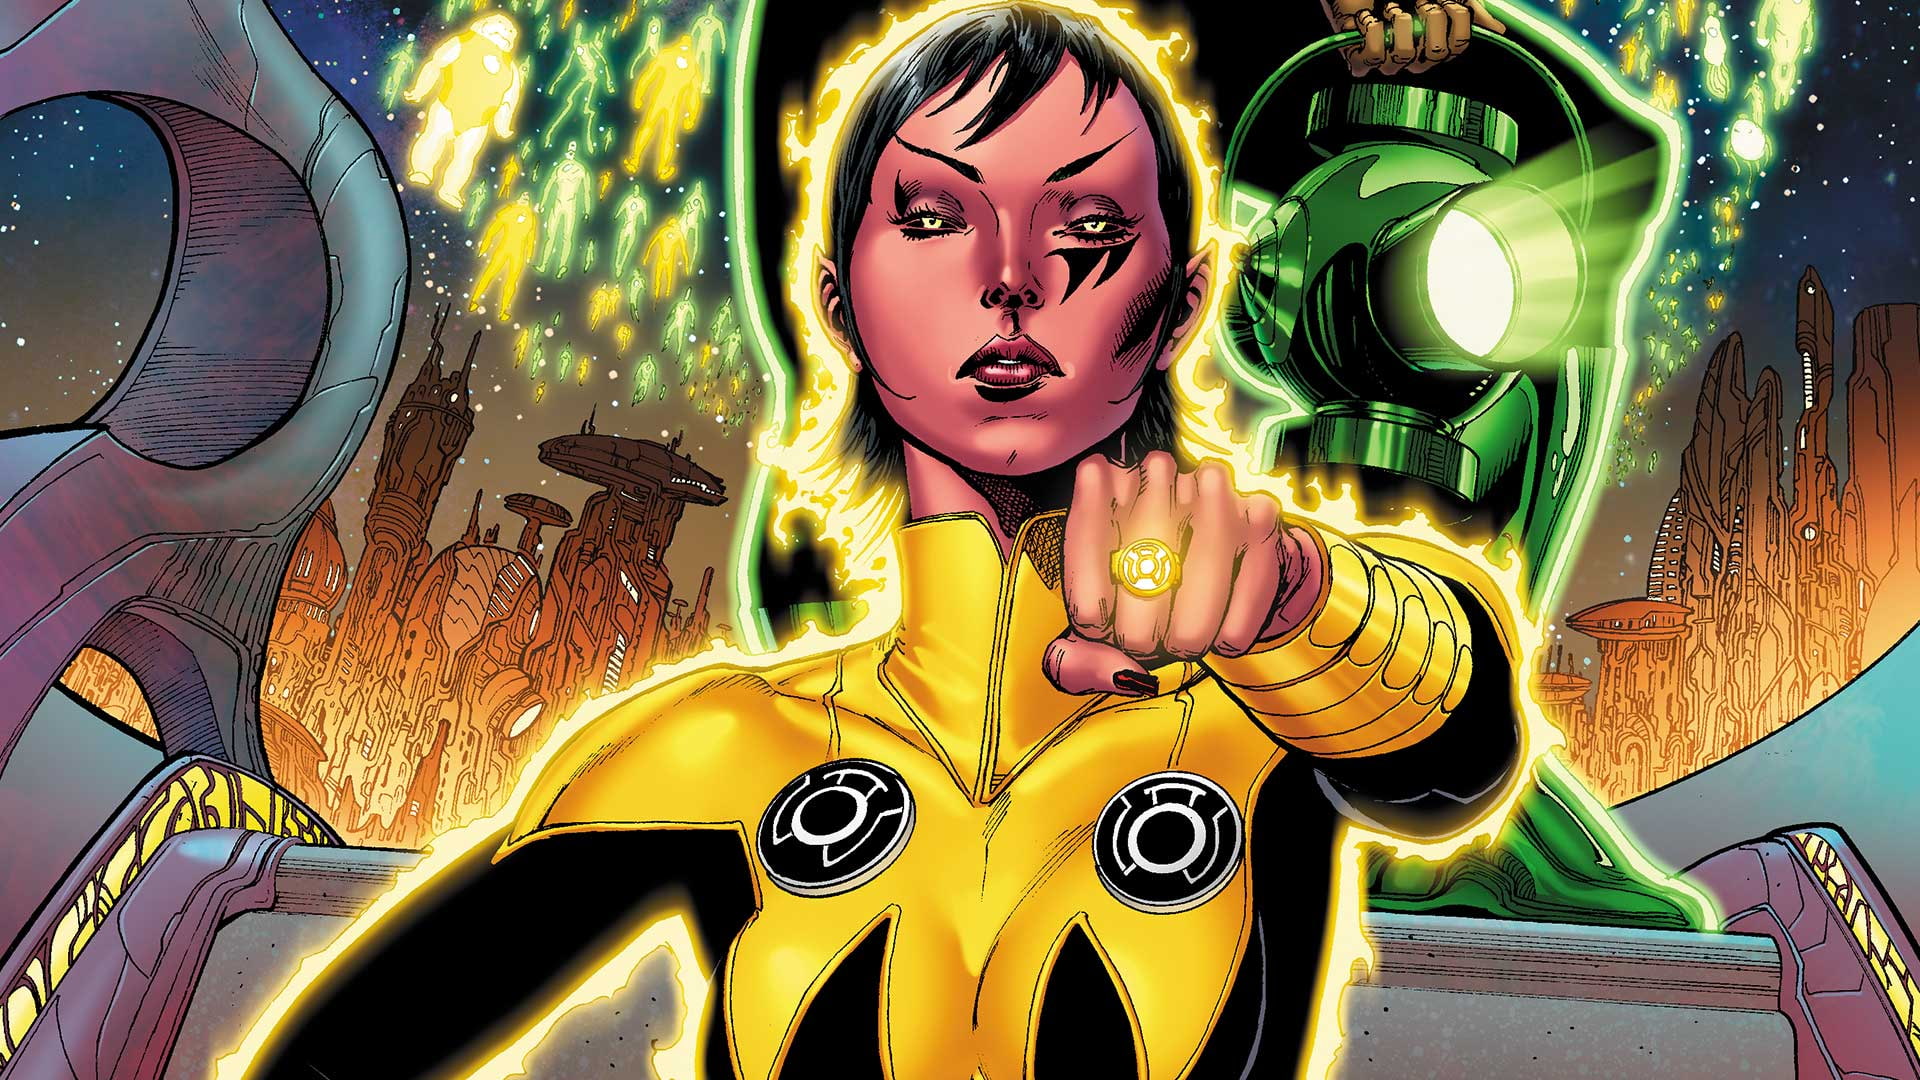 Green Lantern Alliance Between Green Yellow Lanterns The Last In Charge Of Sonoran Natur  Daughter Of Sinestro Hd Desktop Backgrounds Free Download 1920×1080